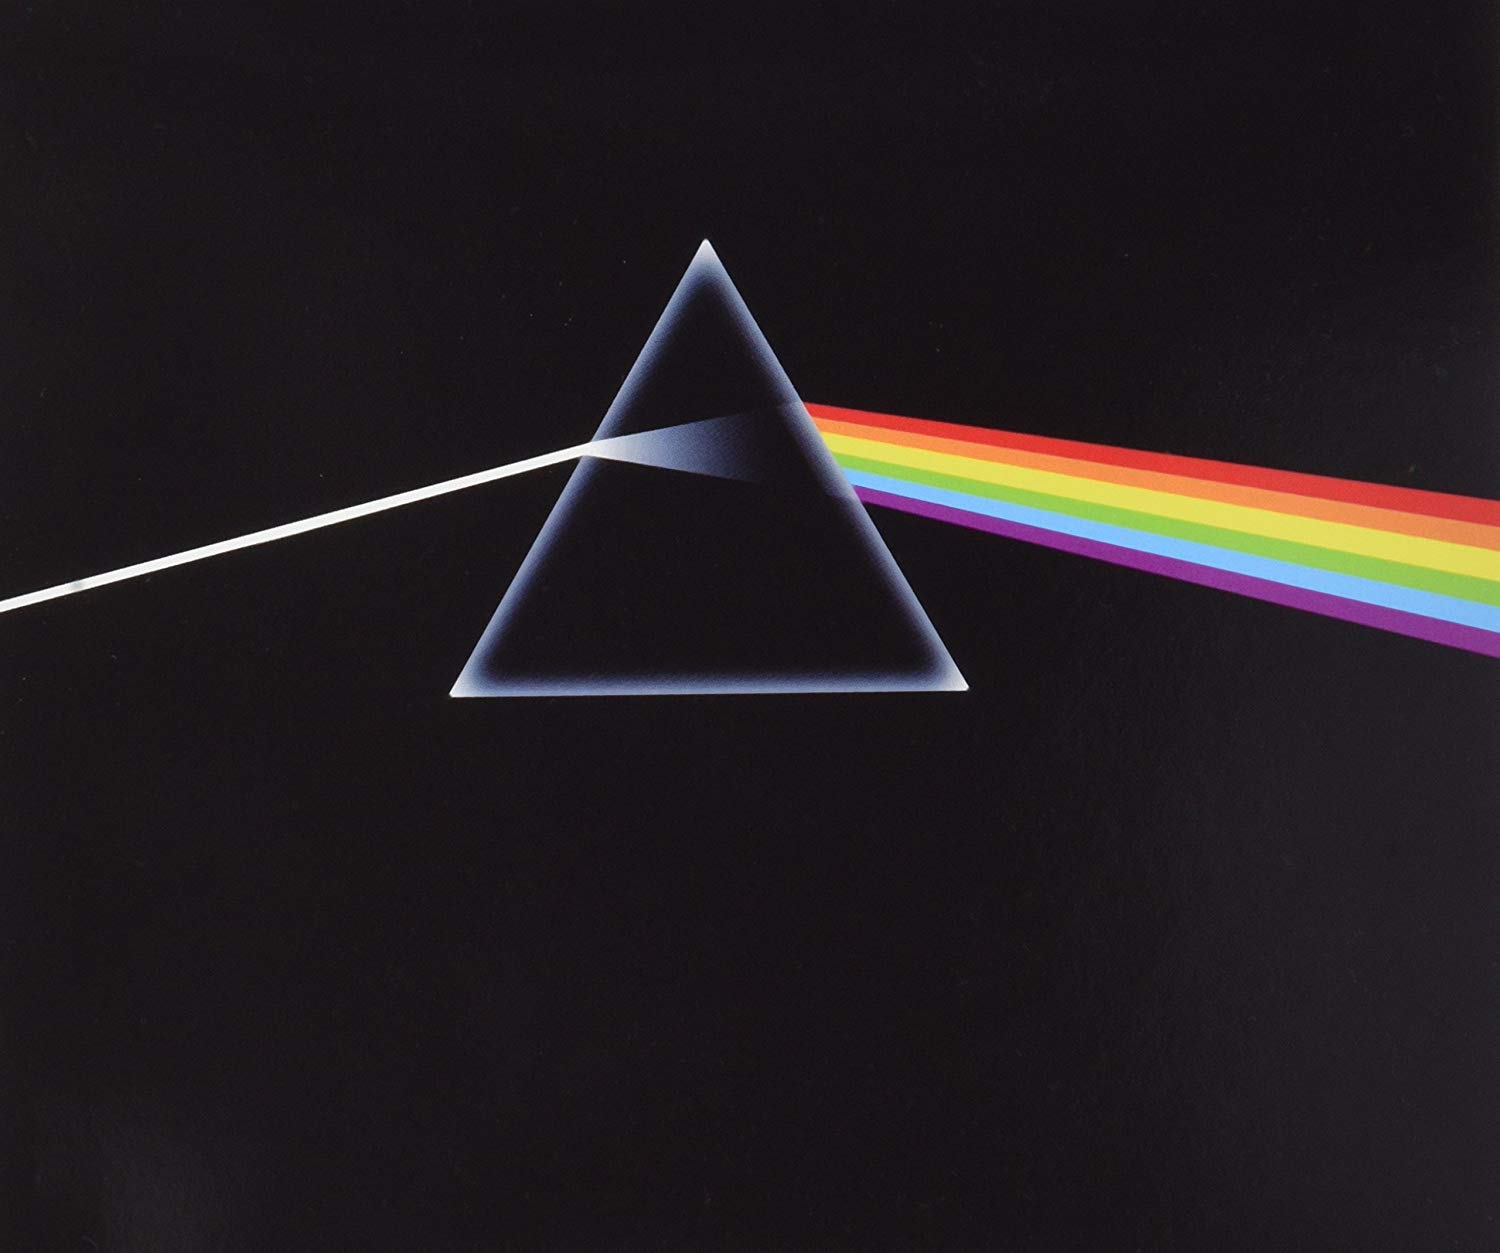 Dark side of the moon - Pink Floyd and Coaching